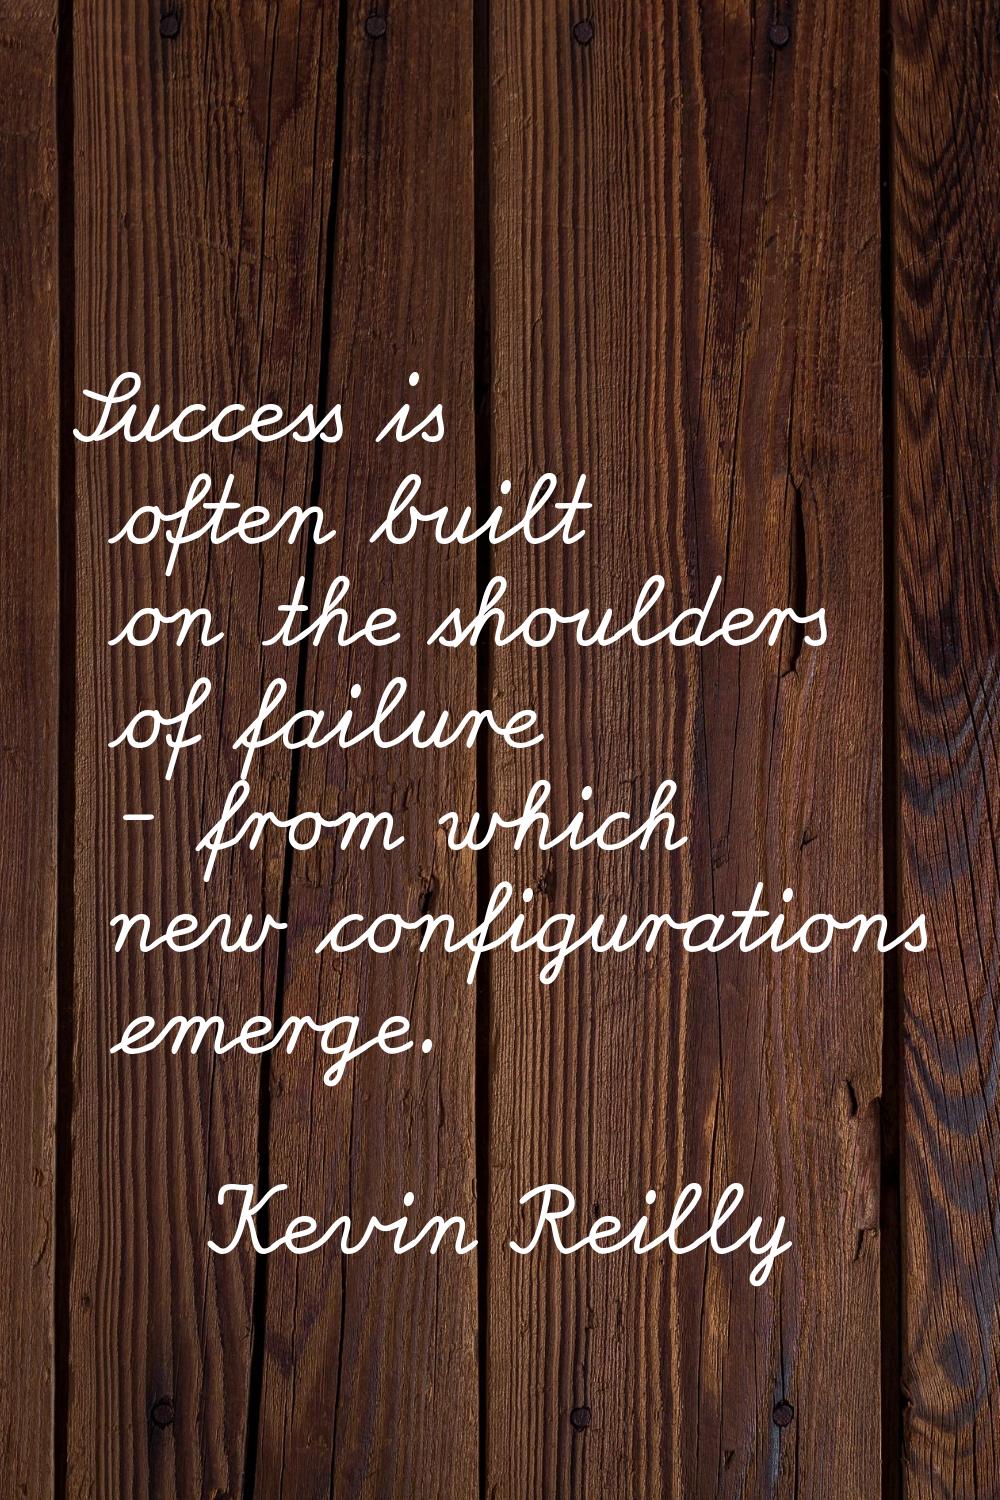 Success is often built on the shoulders of failure - from which new configurations emerge.